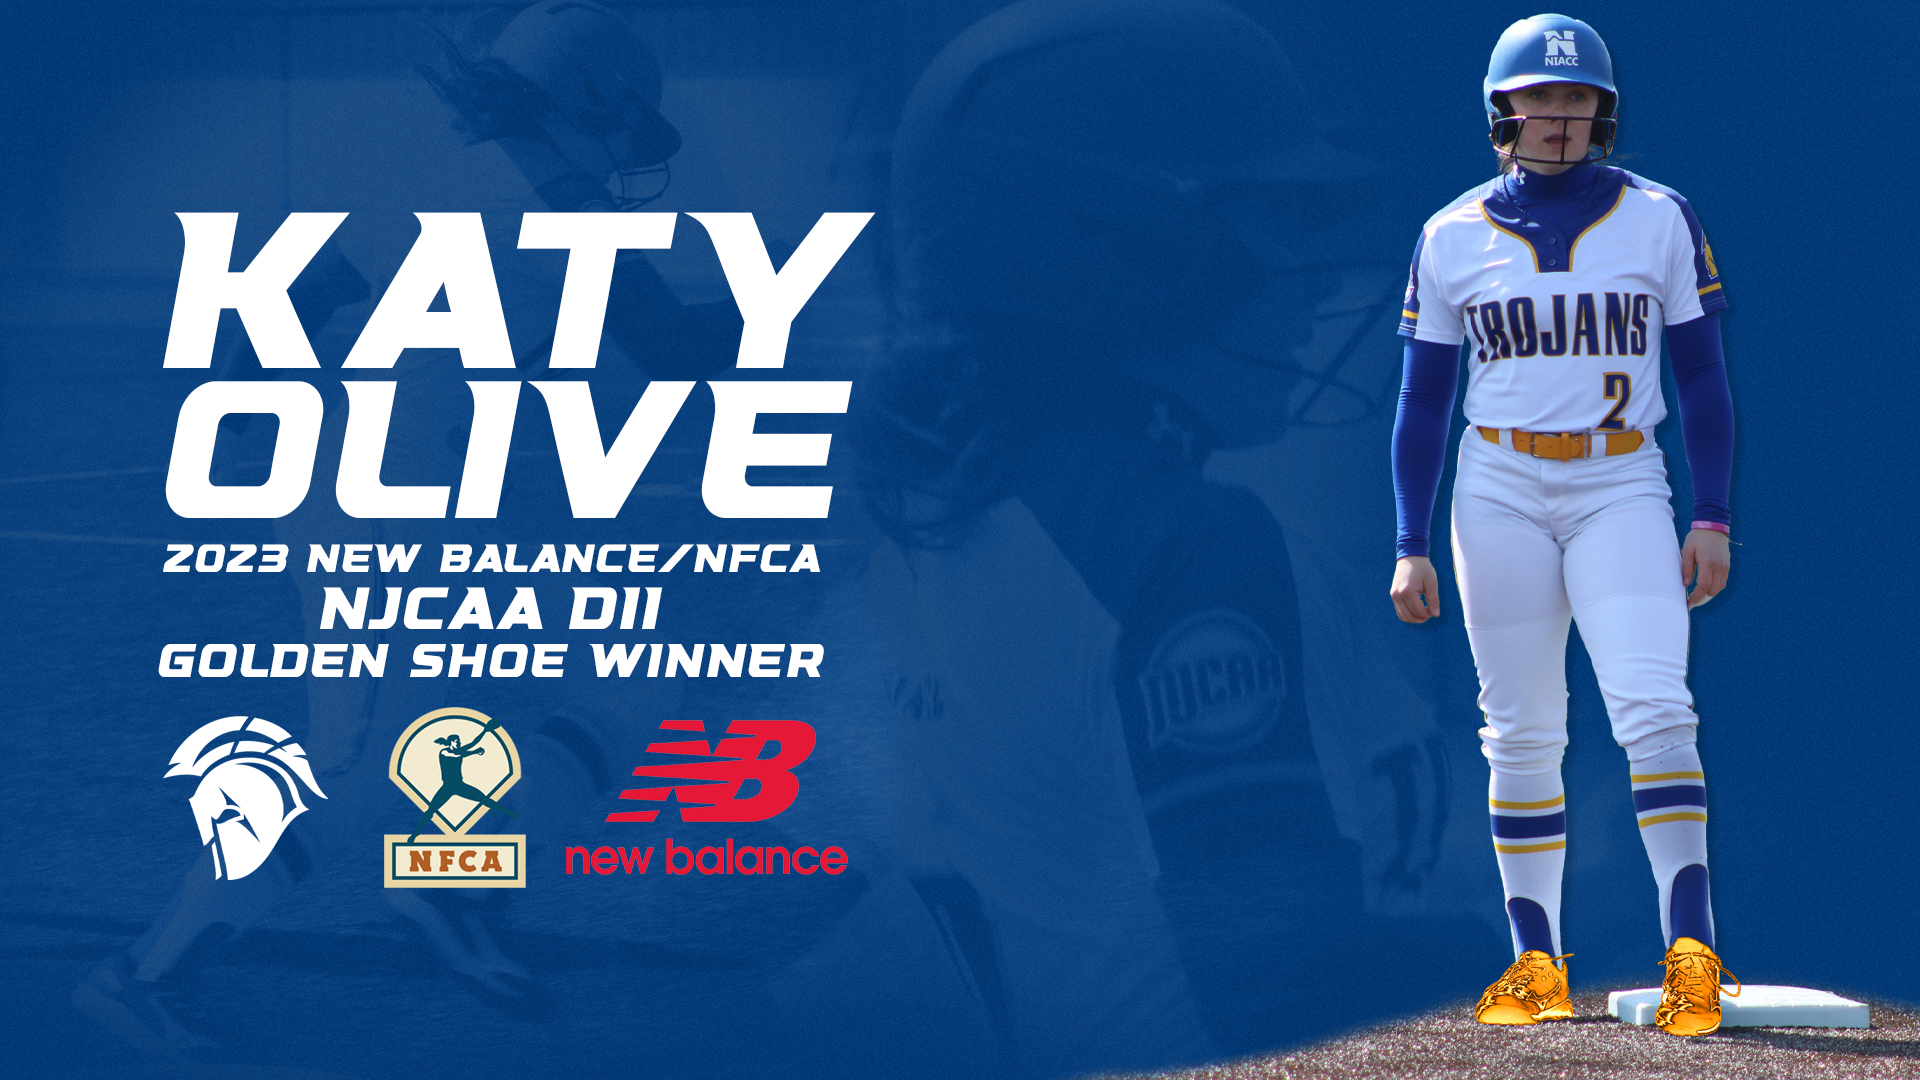 NIACC's Olive wins NFCA Golden Shoe award